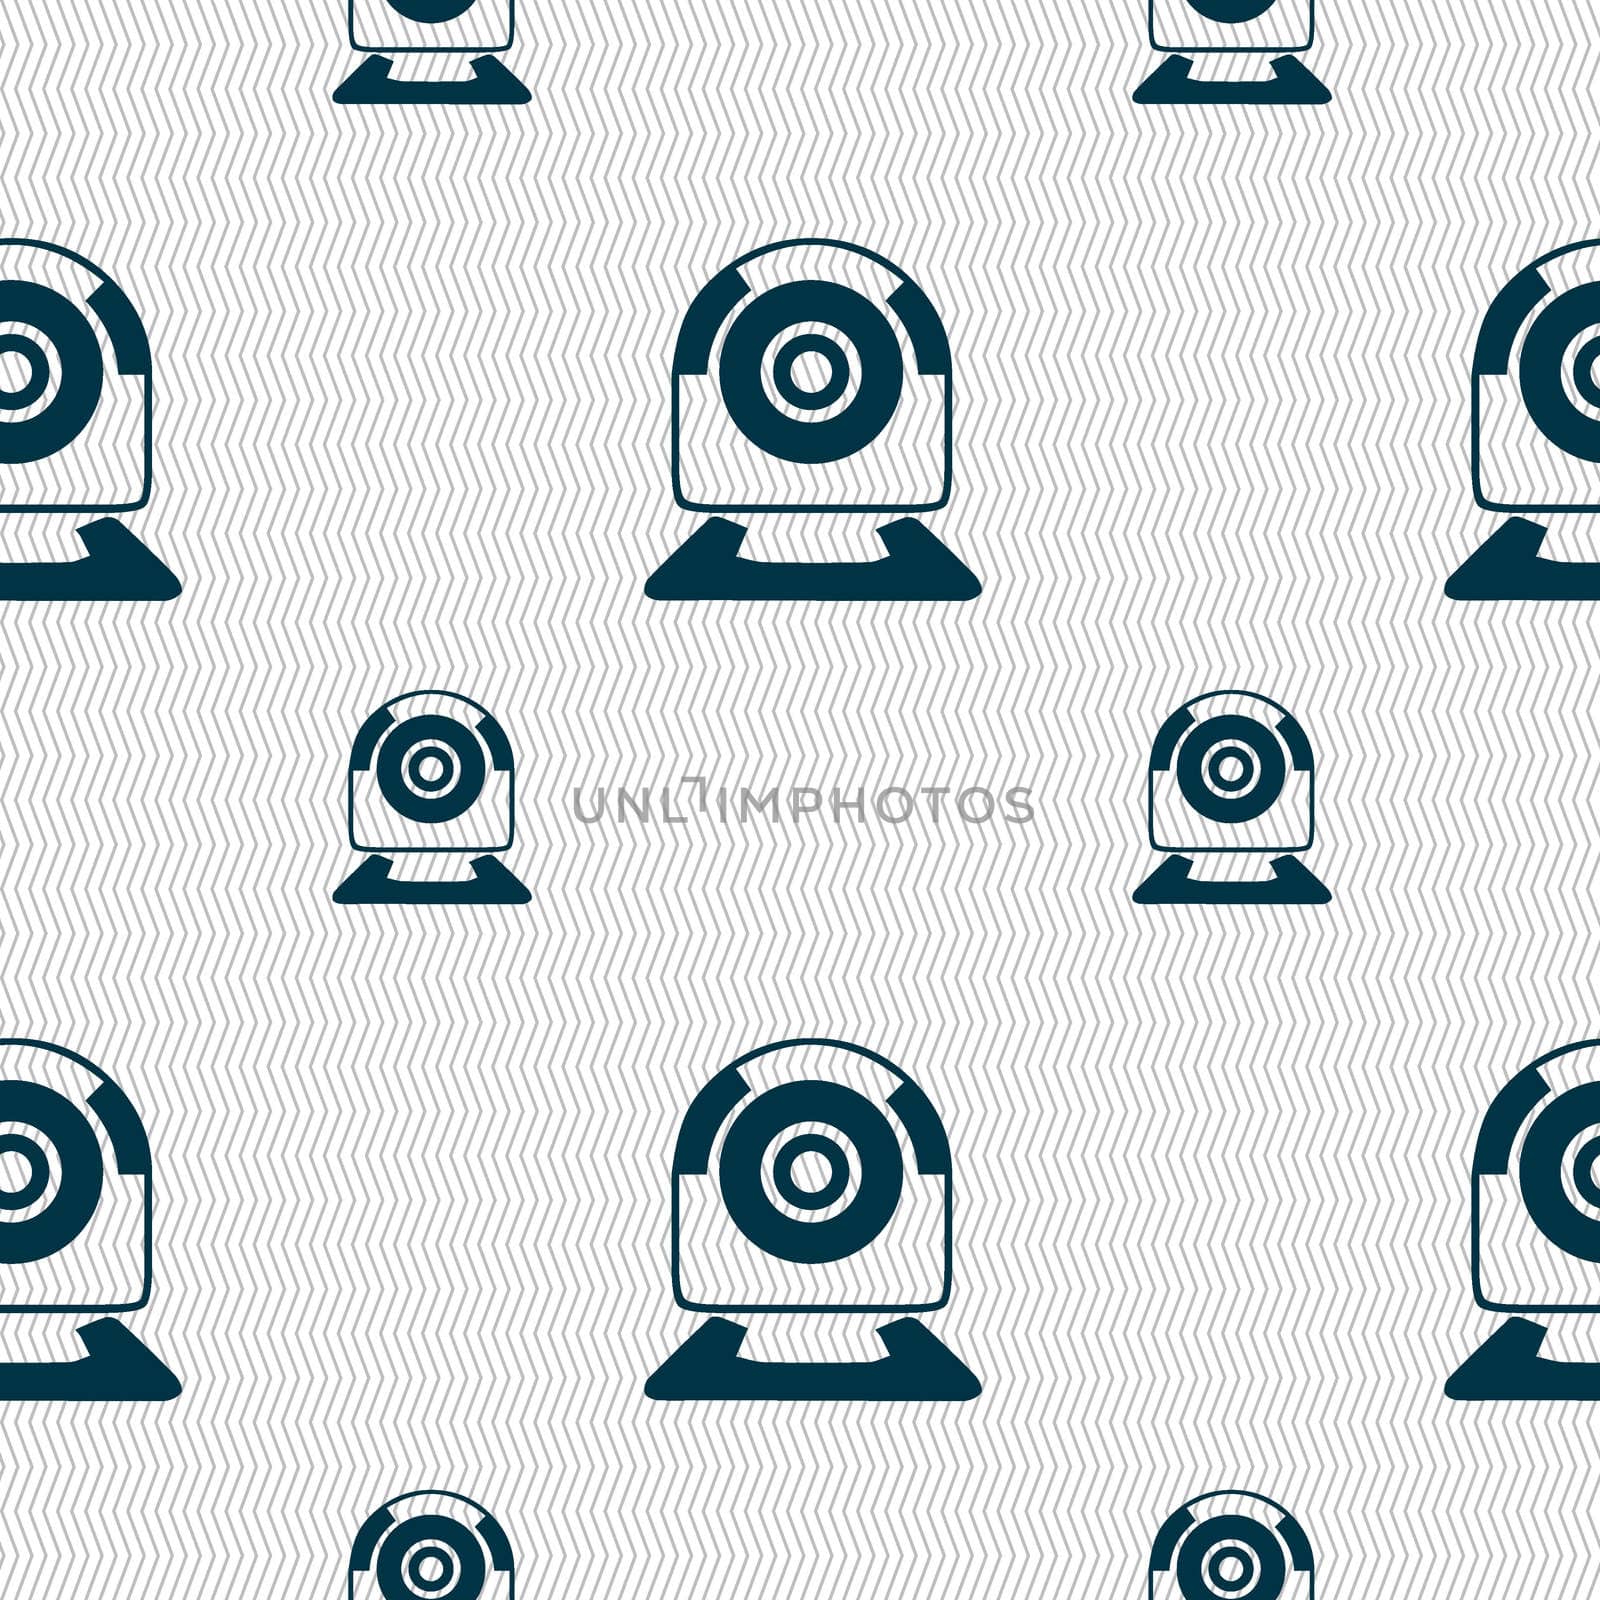 Webcam sign icon. Web video chat symbol. Camera chat. Seamless pattern with geometric texture. illustration